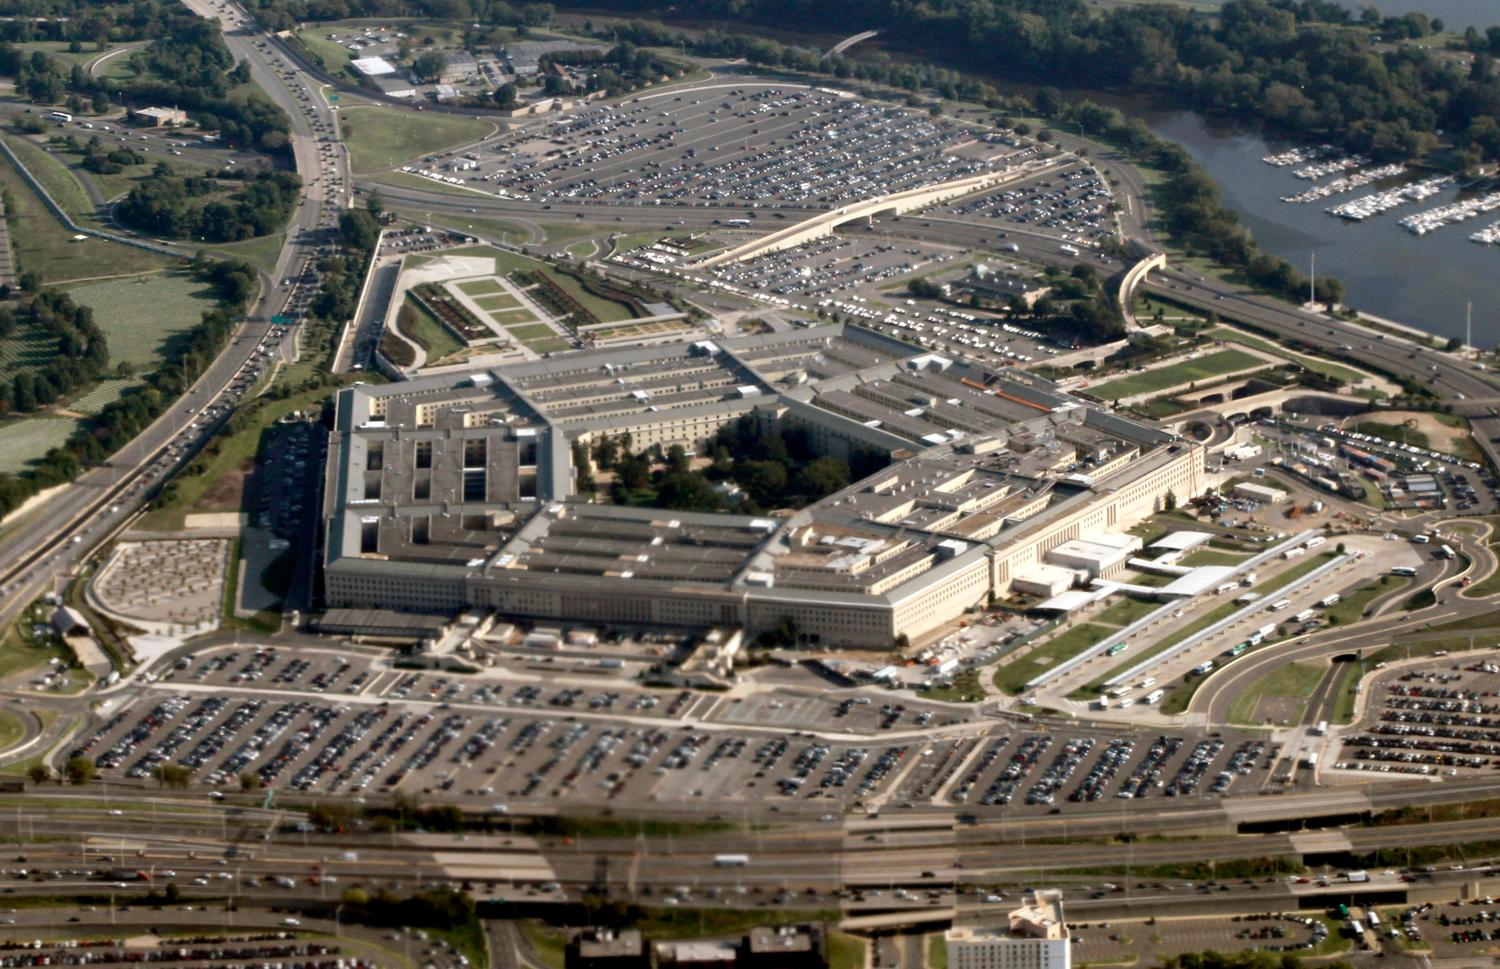 An aerial view of the Pentagon in Washington August 31, 2010. REUTERS/Jason Reed (UNITED STATES - Tags: MILITARY POLITICS) - GM1E6910E5T01